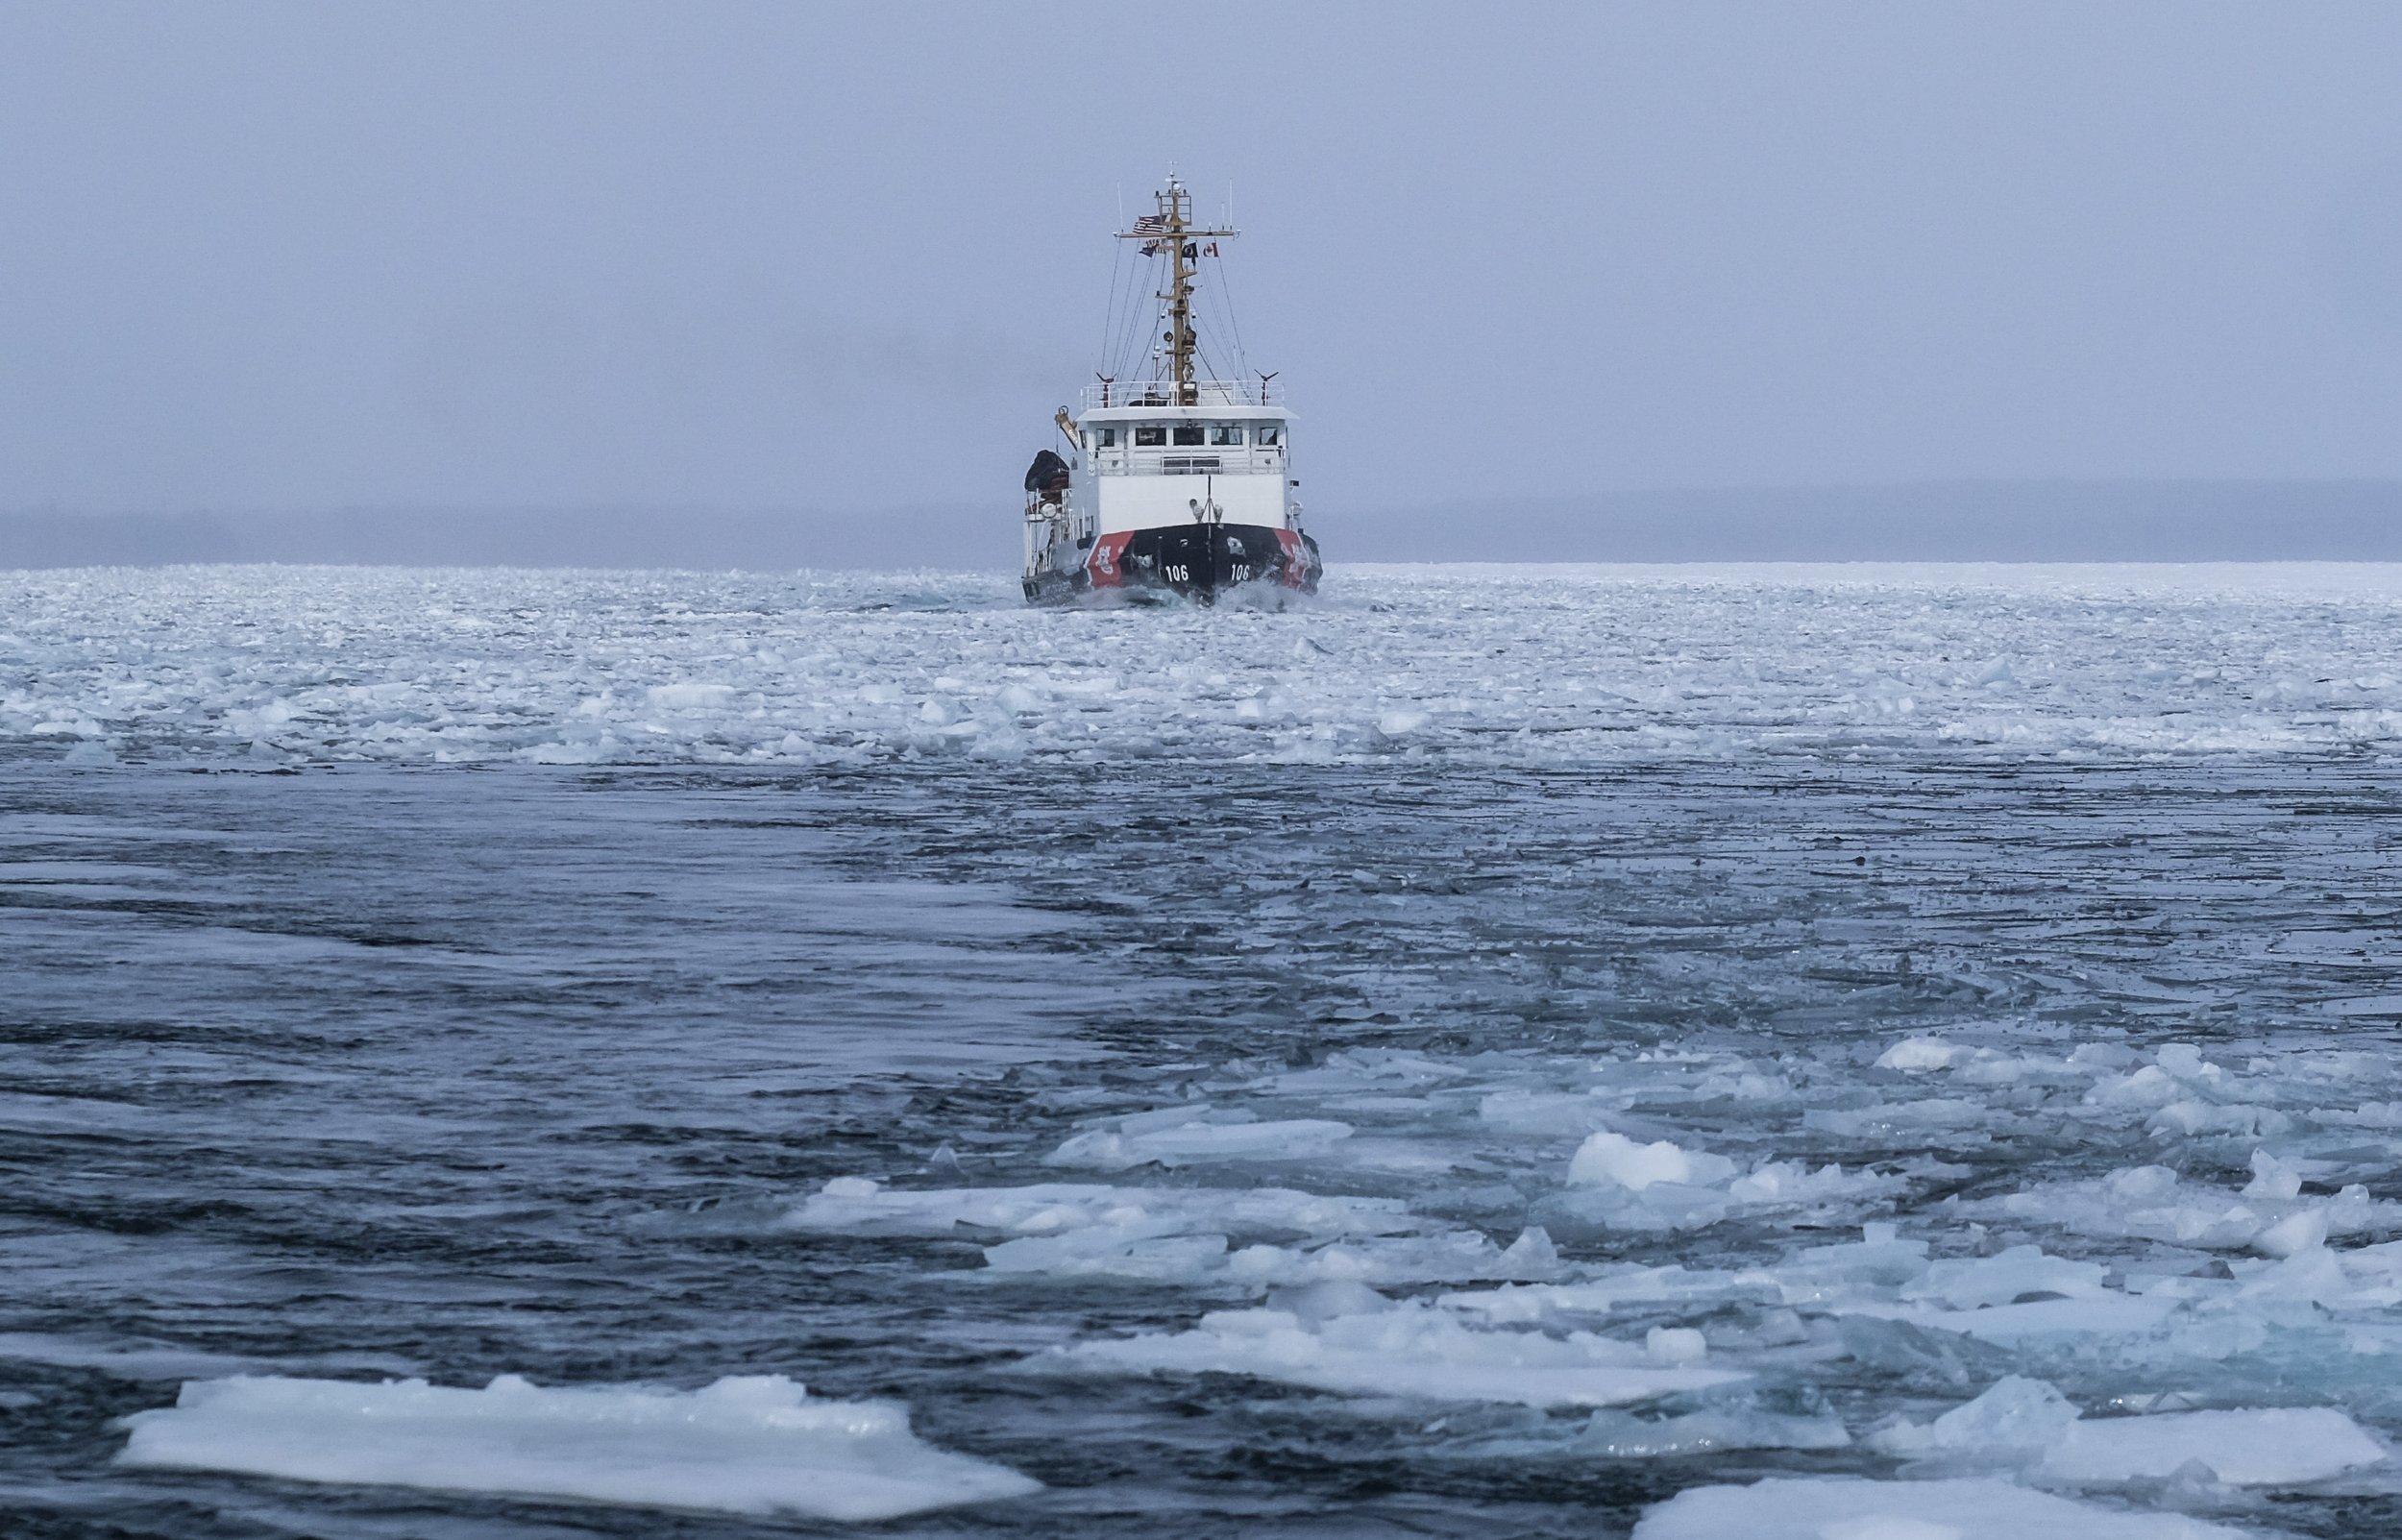  The US Coast Guard Cutter 'Morro Bay' participates in Ice Breaking operations alongside USCGC 'Katmai Bay' to clear a Frozen  section of the St. Mary's river on Monday, March 13, 2023 near Lake Huron. 